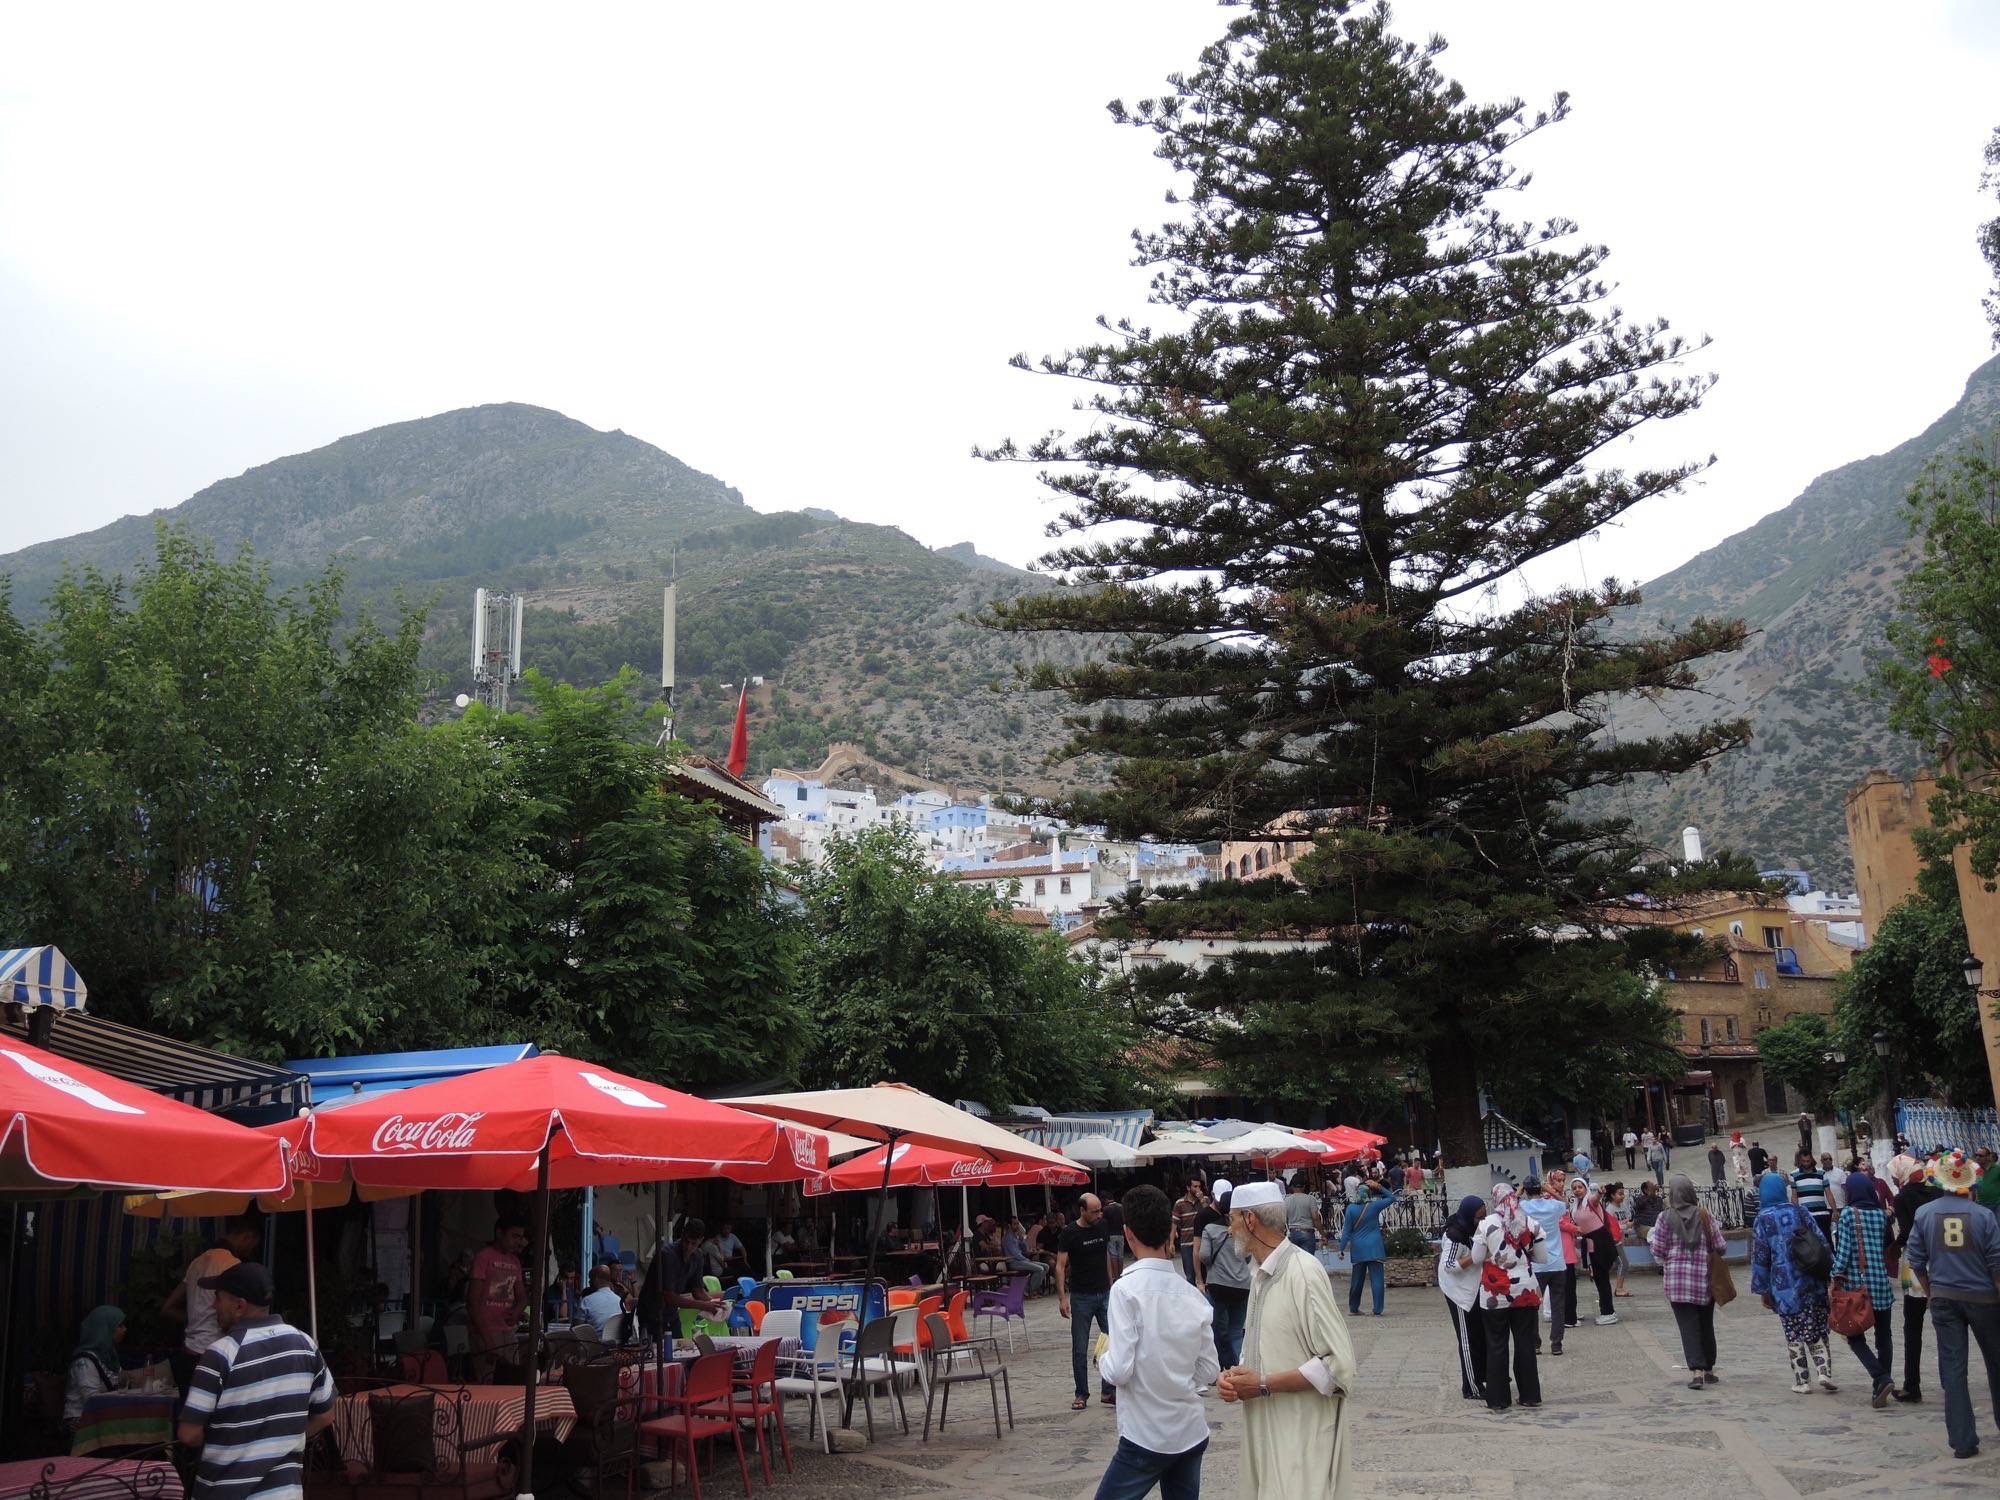 General view of the square from the medina toward a mountain.  The casbah tower is on the right.  A section of the city walls is visible in the background of the photograph.